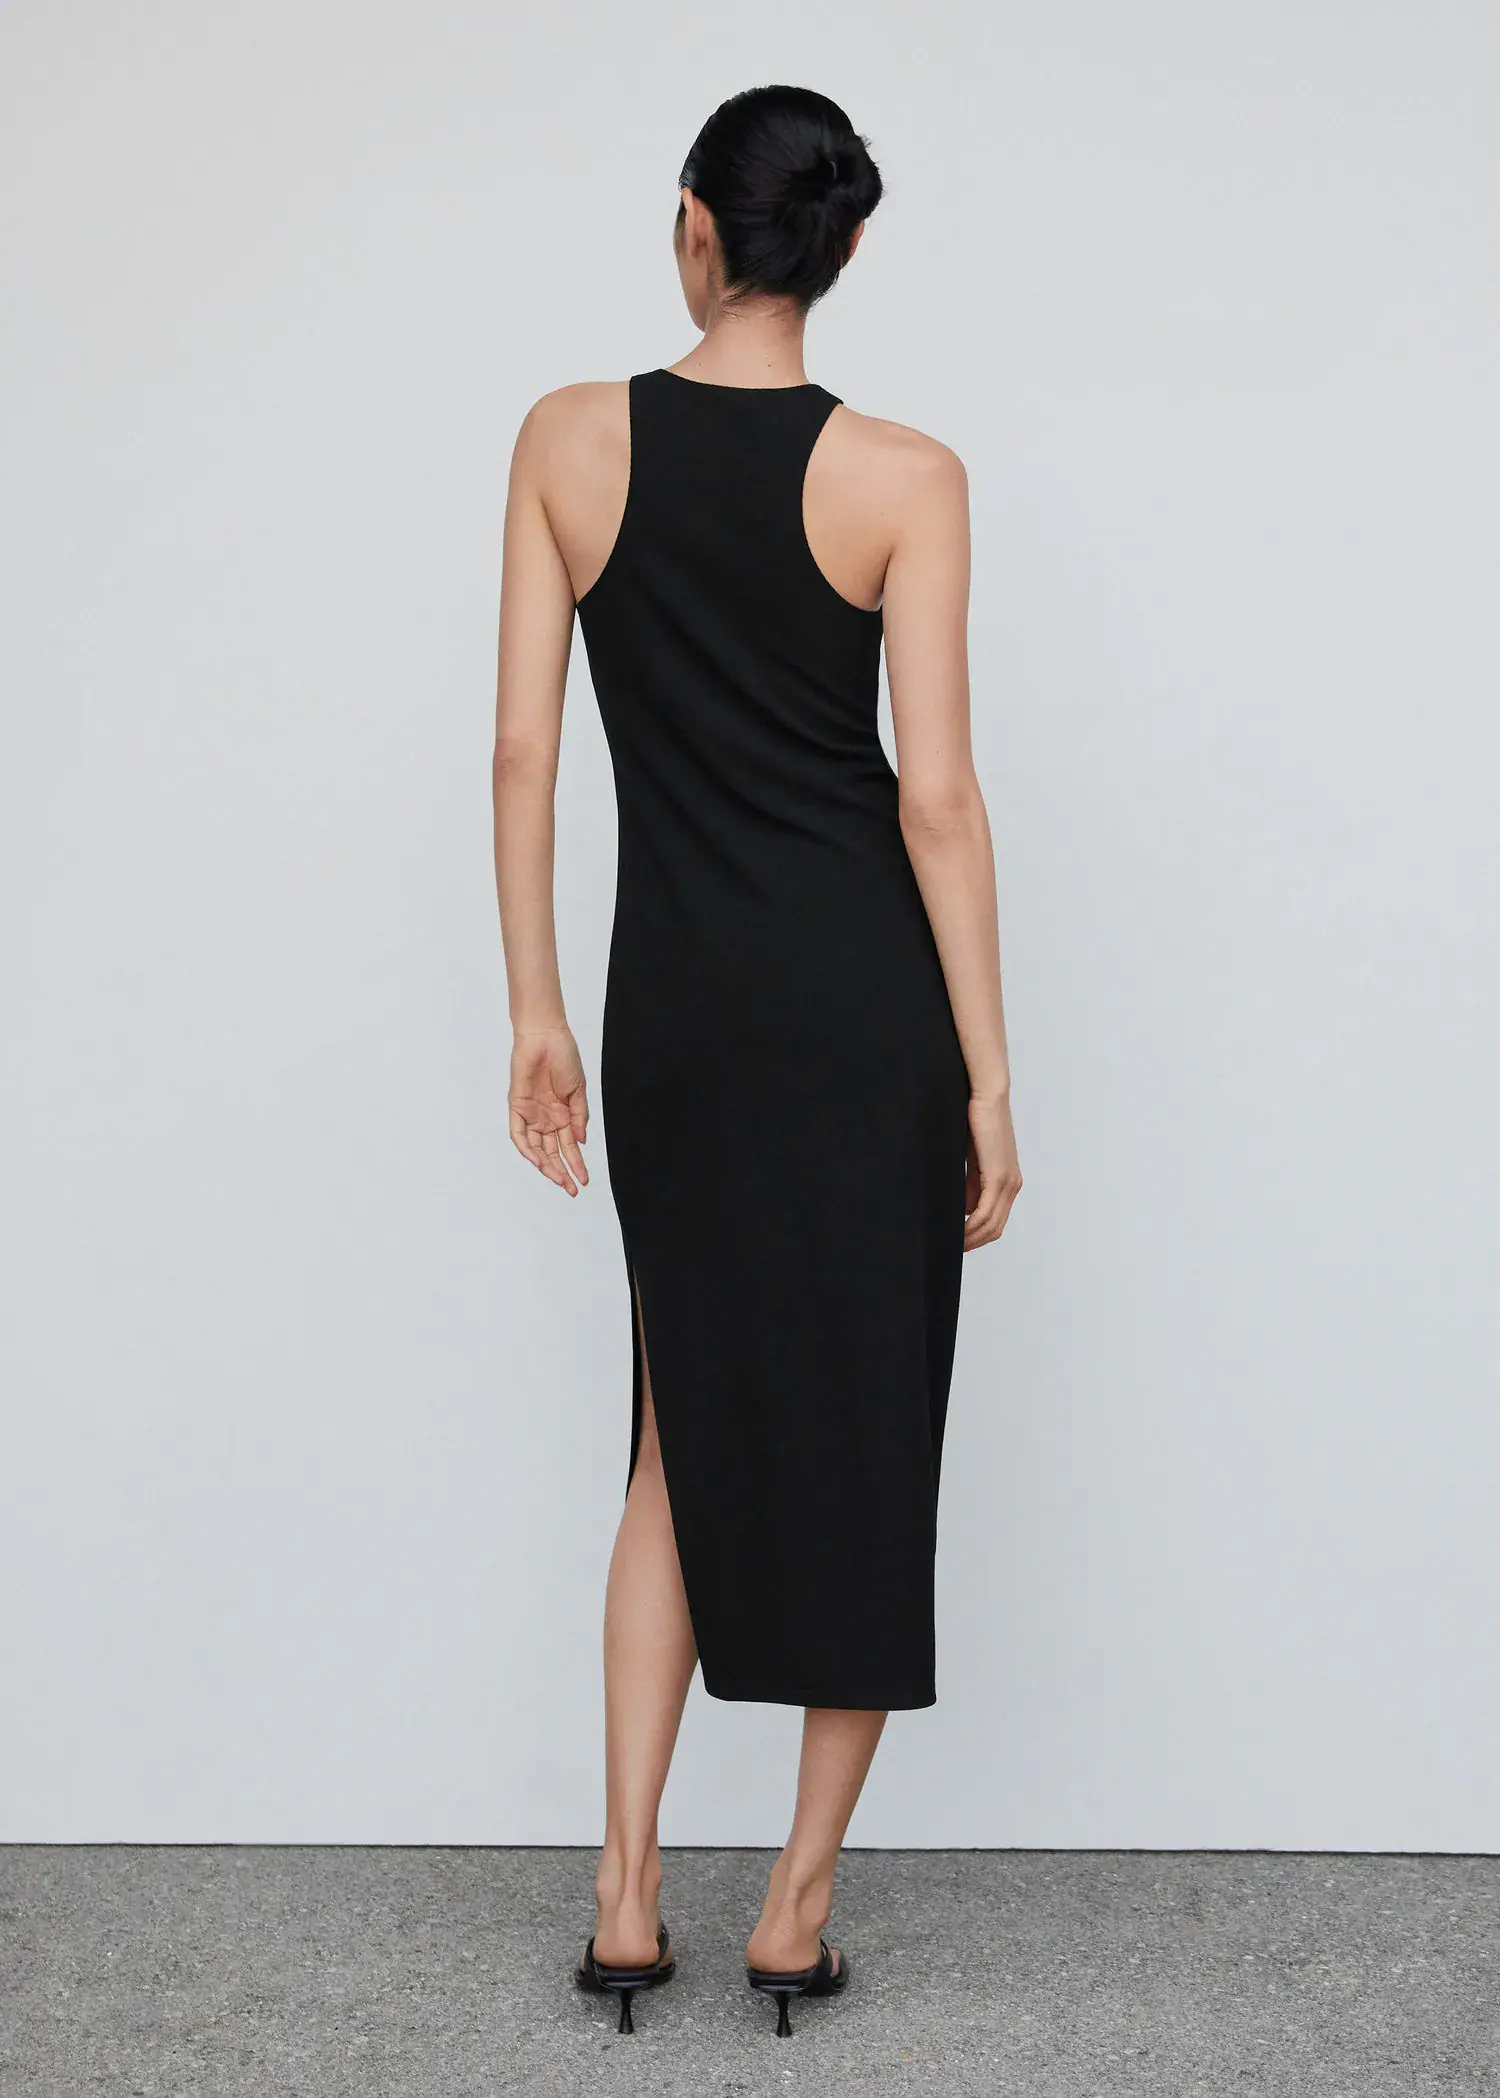 Mango Midi-dress with slit. a woman in a black dress is standing in front of a white wall. 